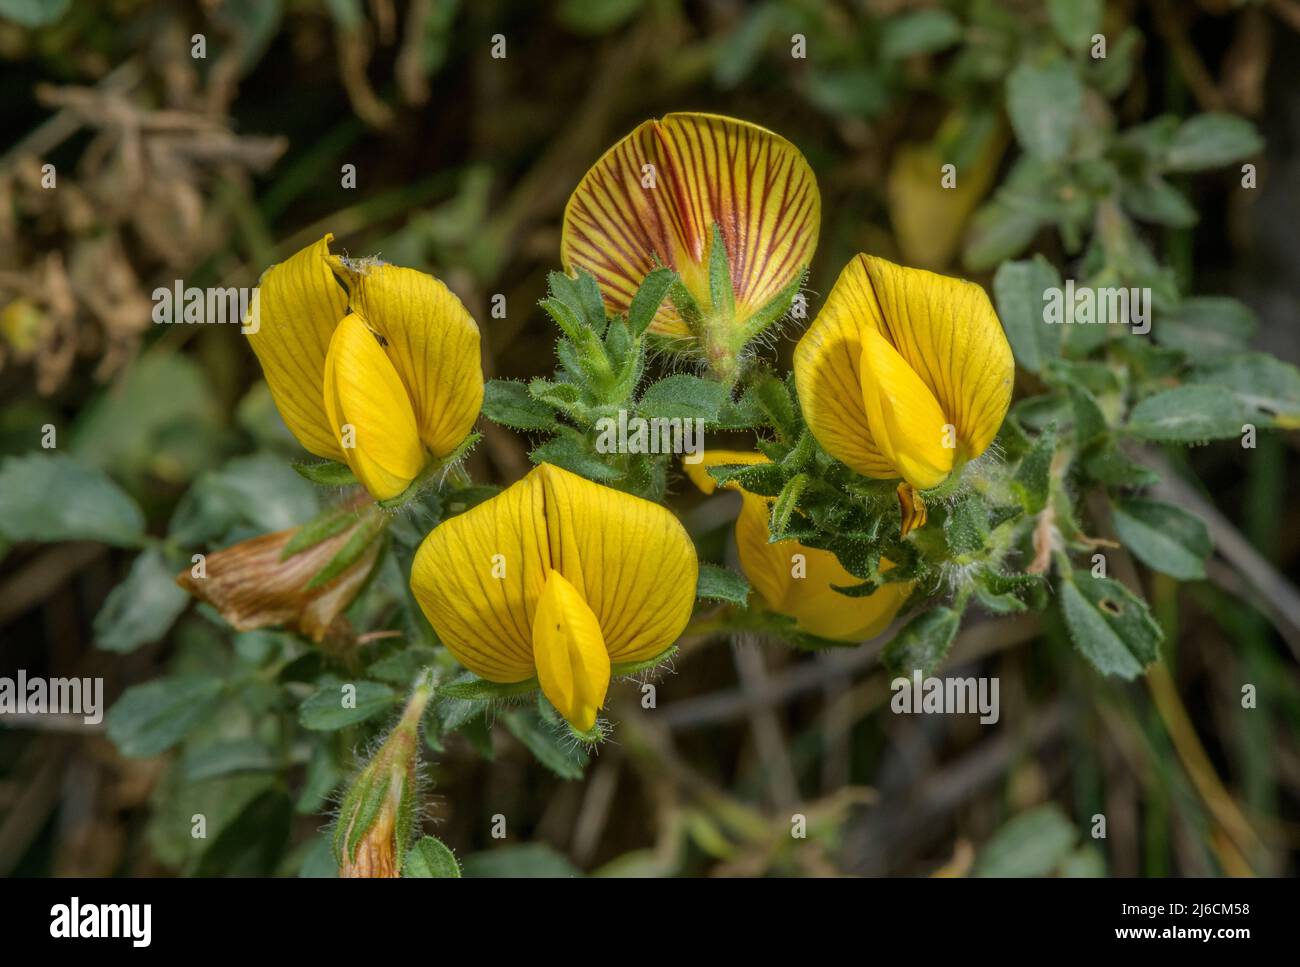 Yellow restharrow, Ononis natrix, in flower showing striped back of standards. Pyrenees. Stock Photo